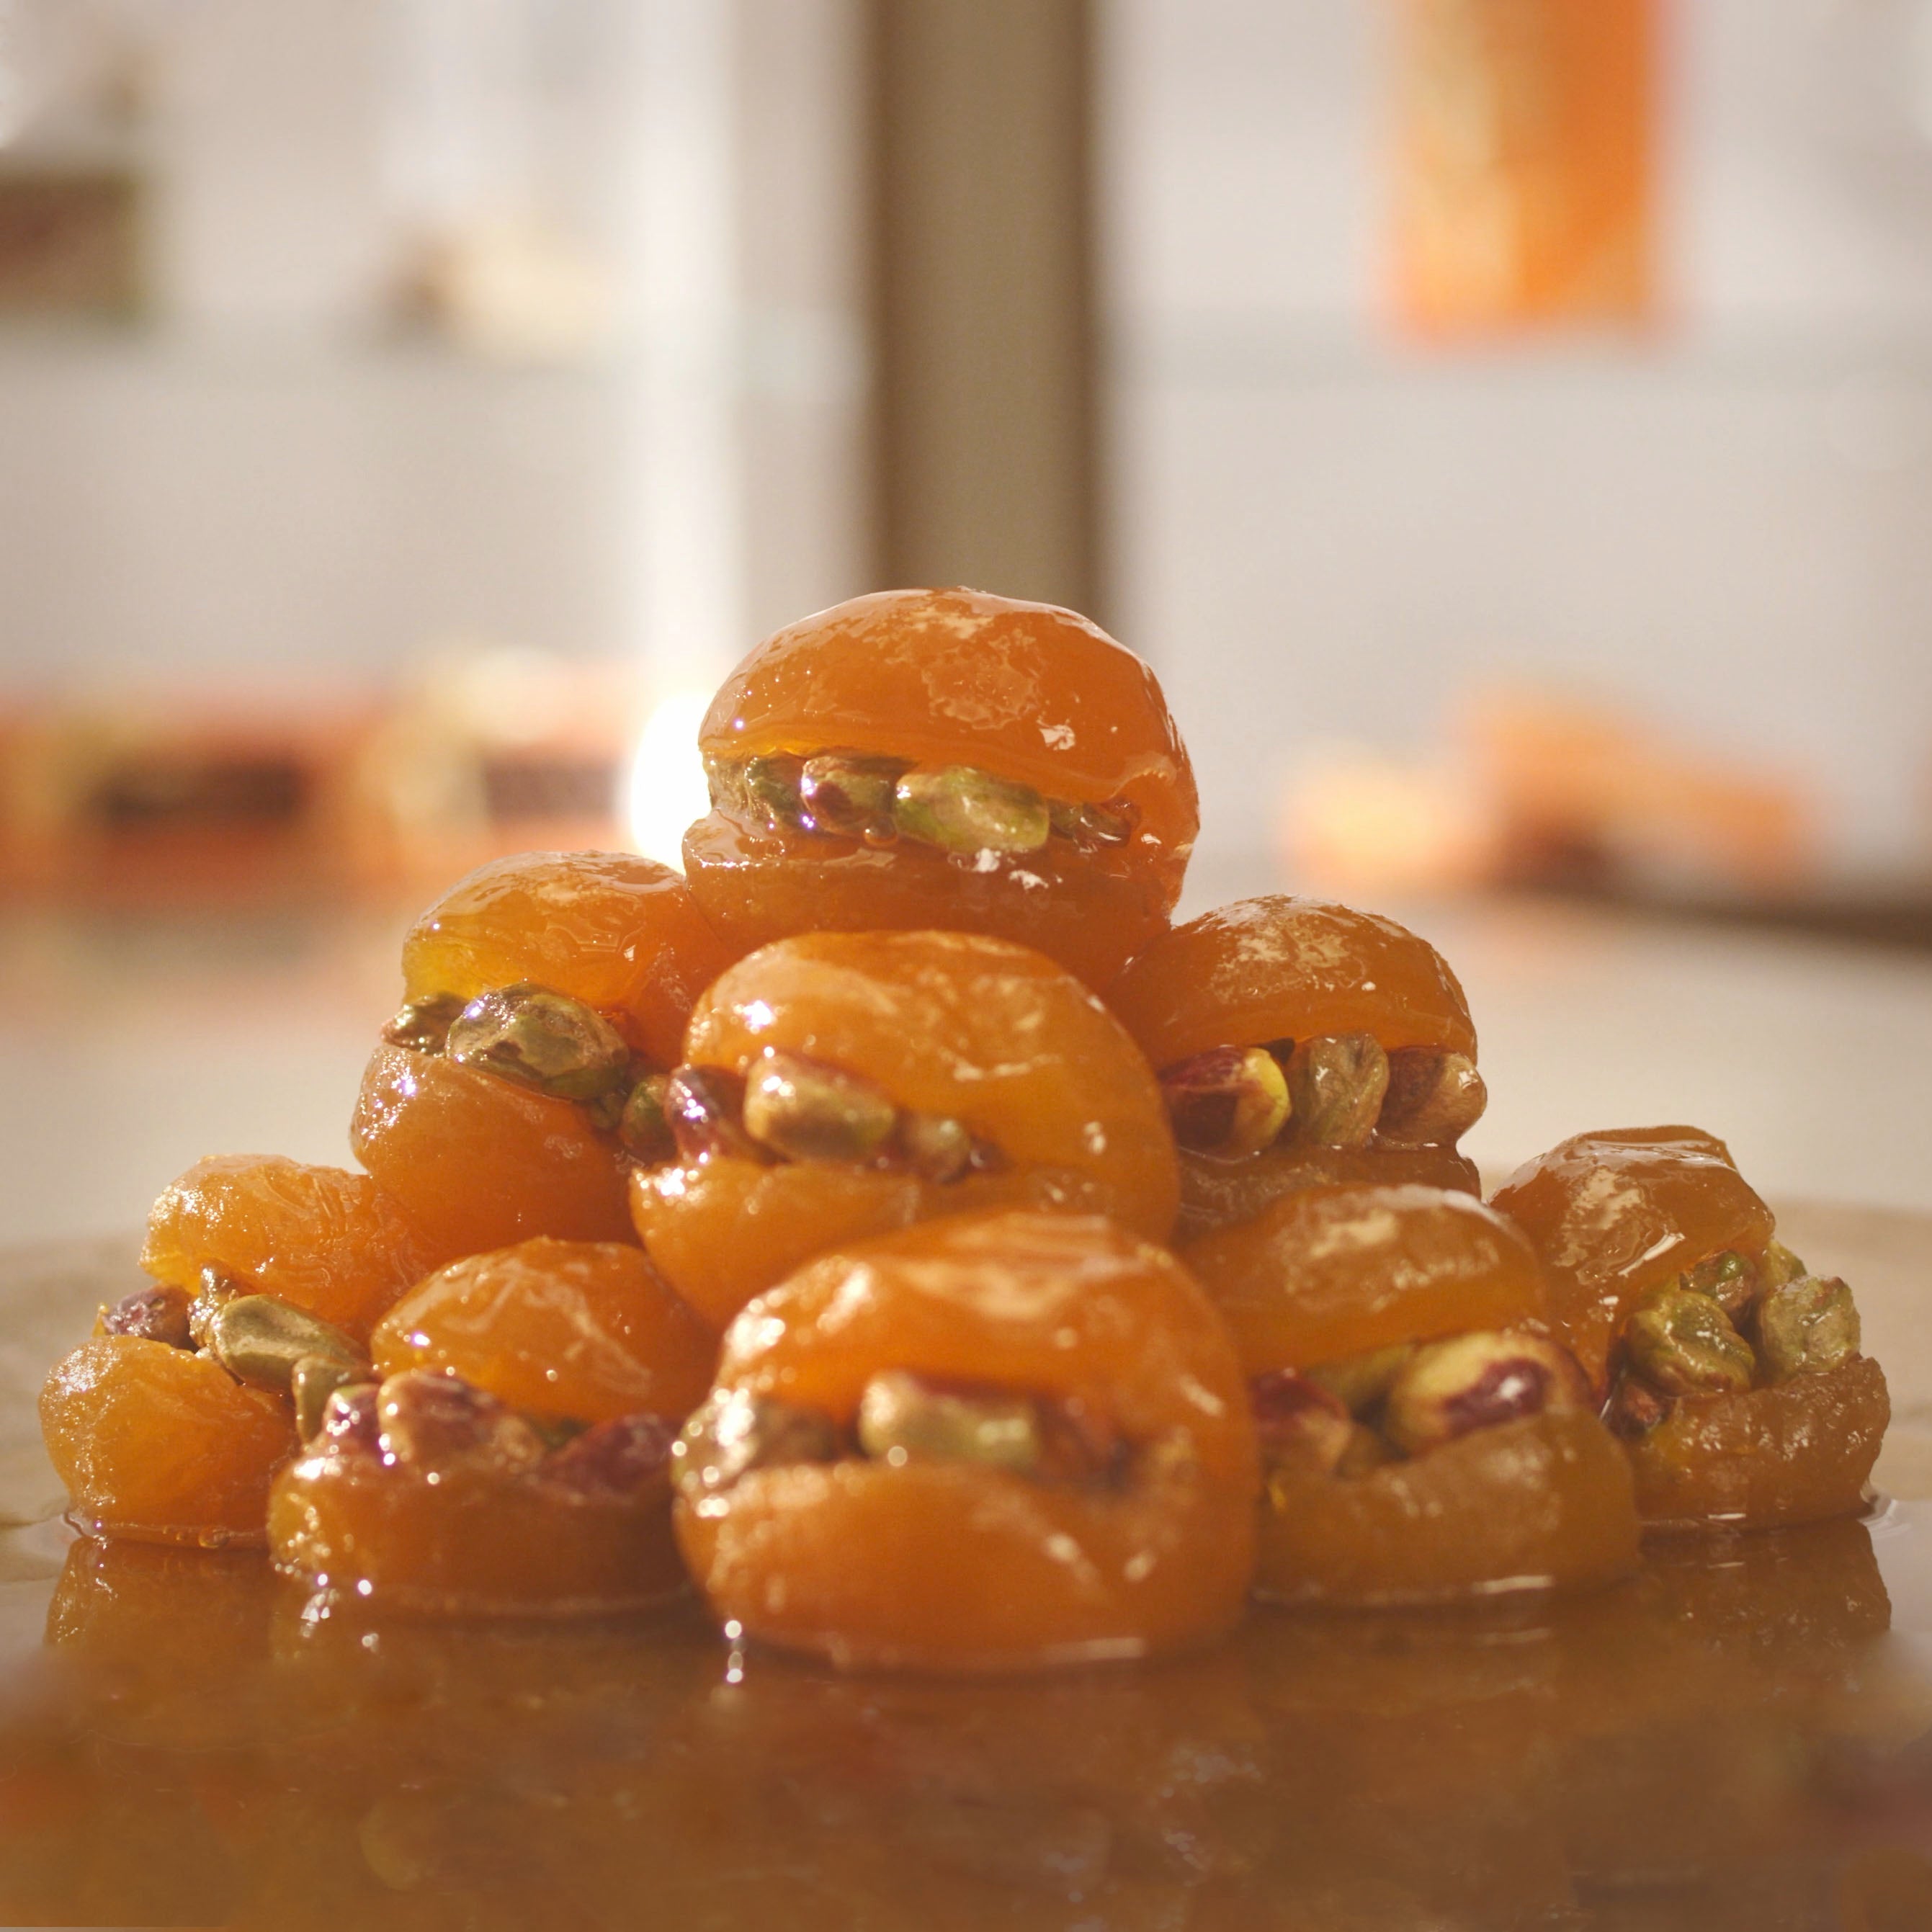 Apricots with pistachios arranged in a pyramid shape